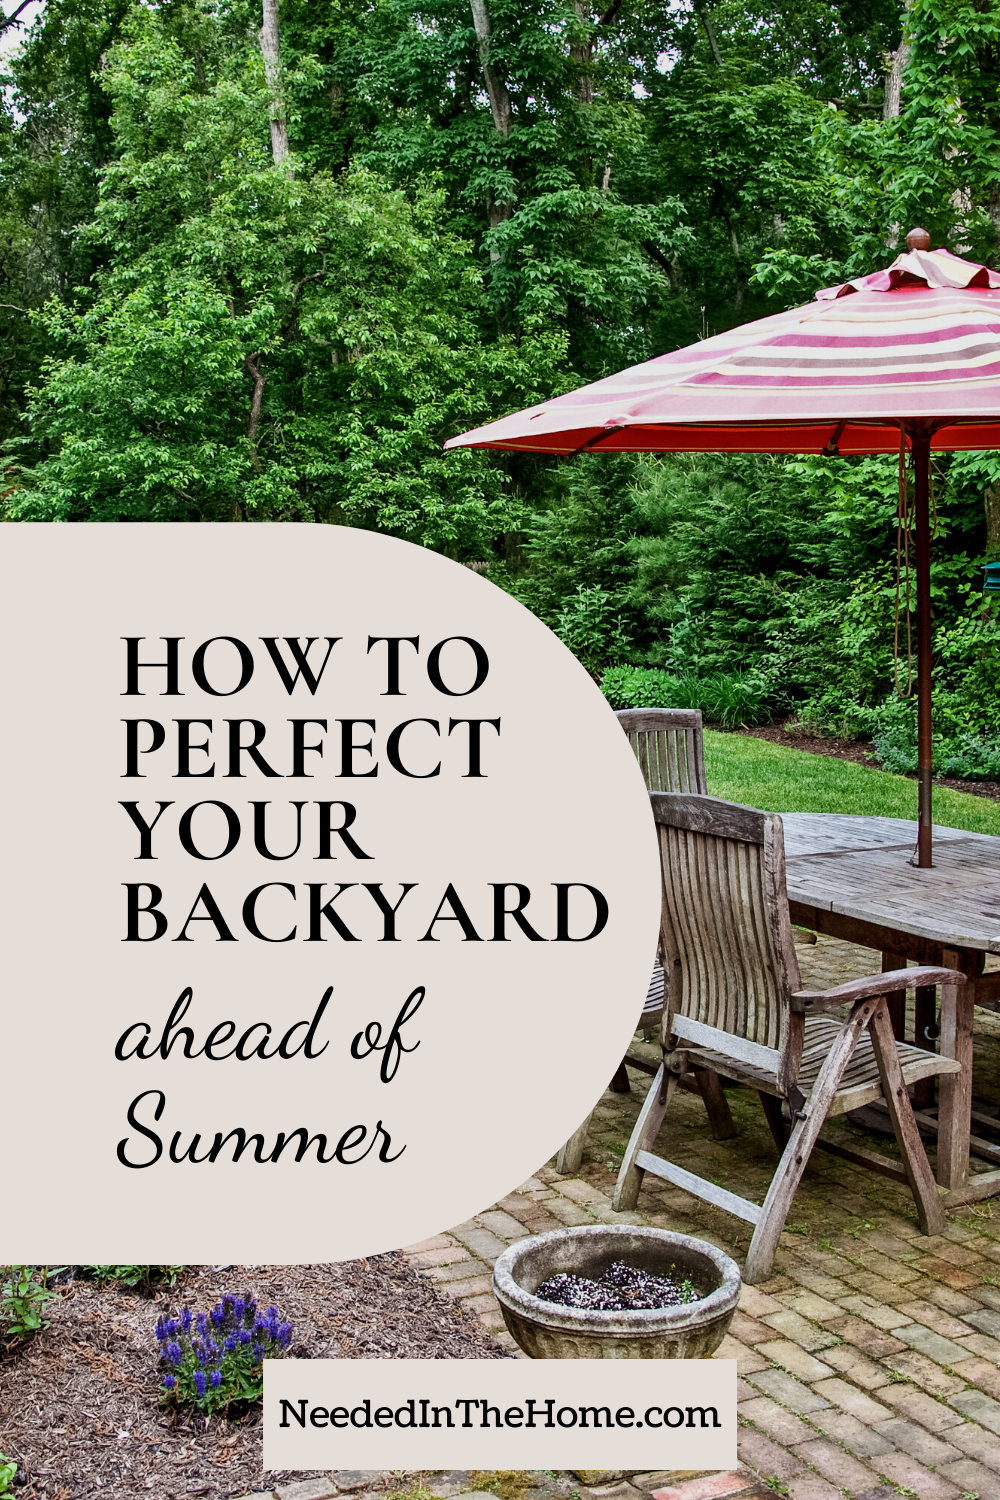 pinterest-pin-description how to perfect your backyard ahead of summer brick patio wood table chairs umbrella potted plants trees neededinthehome